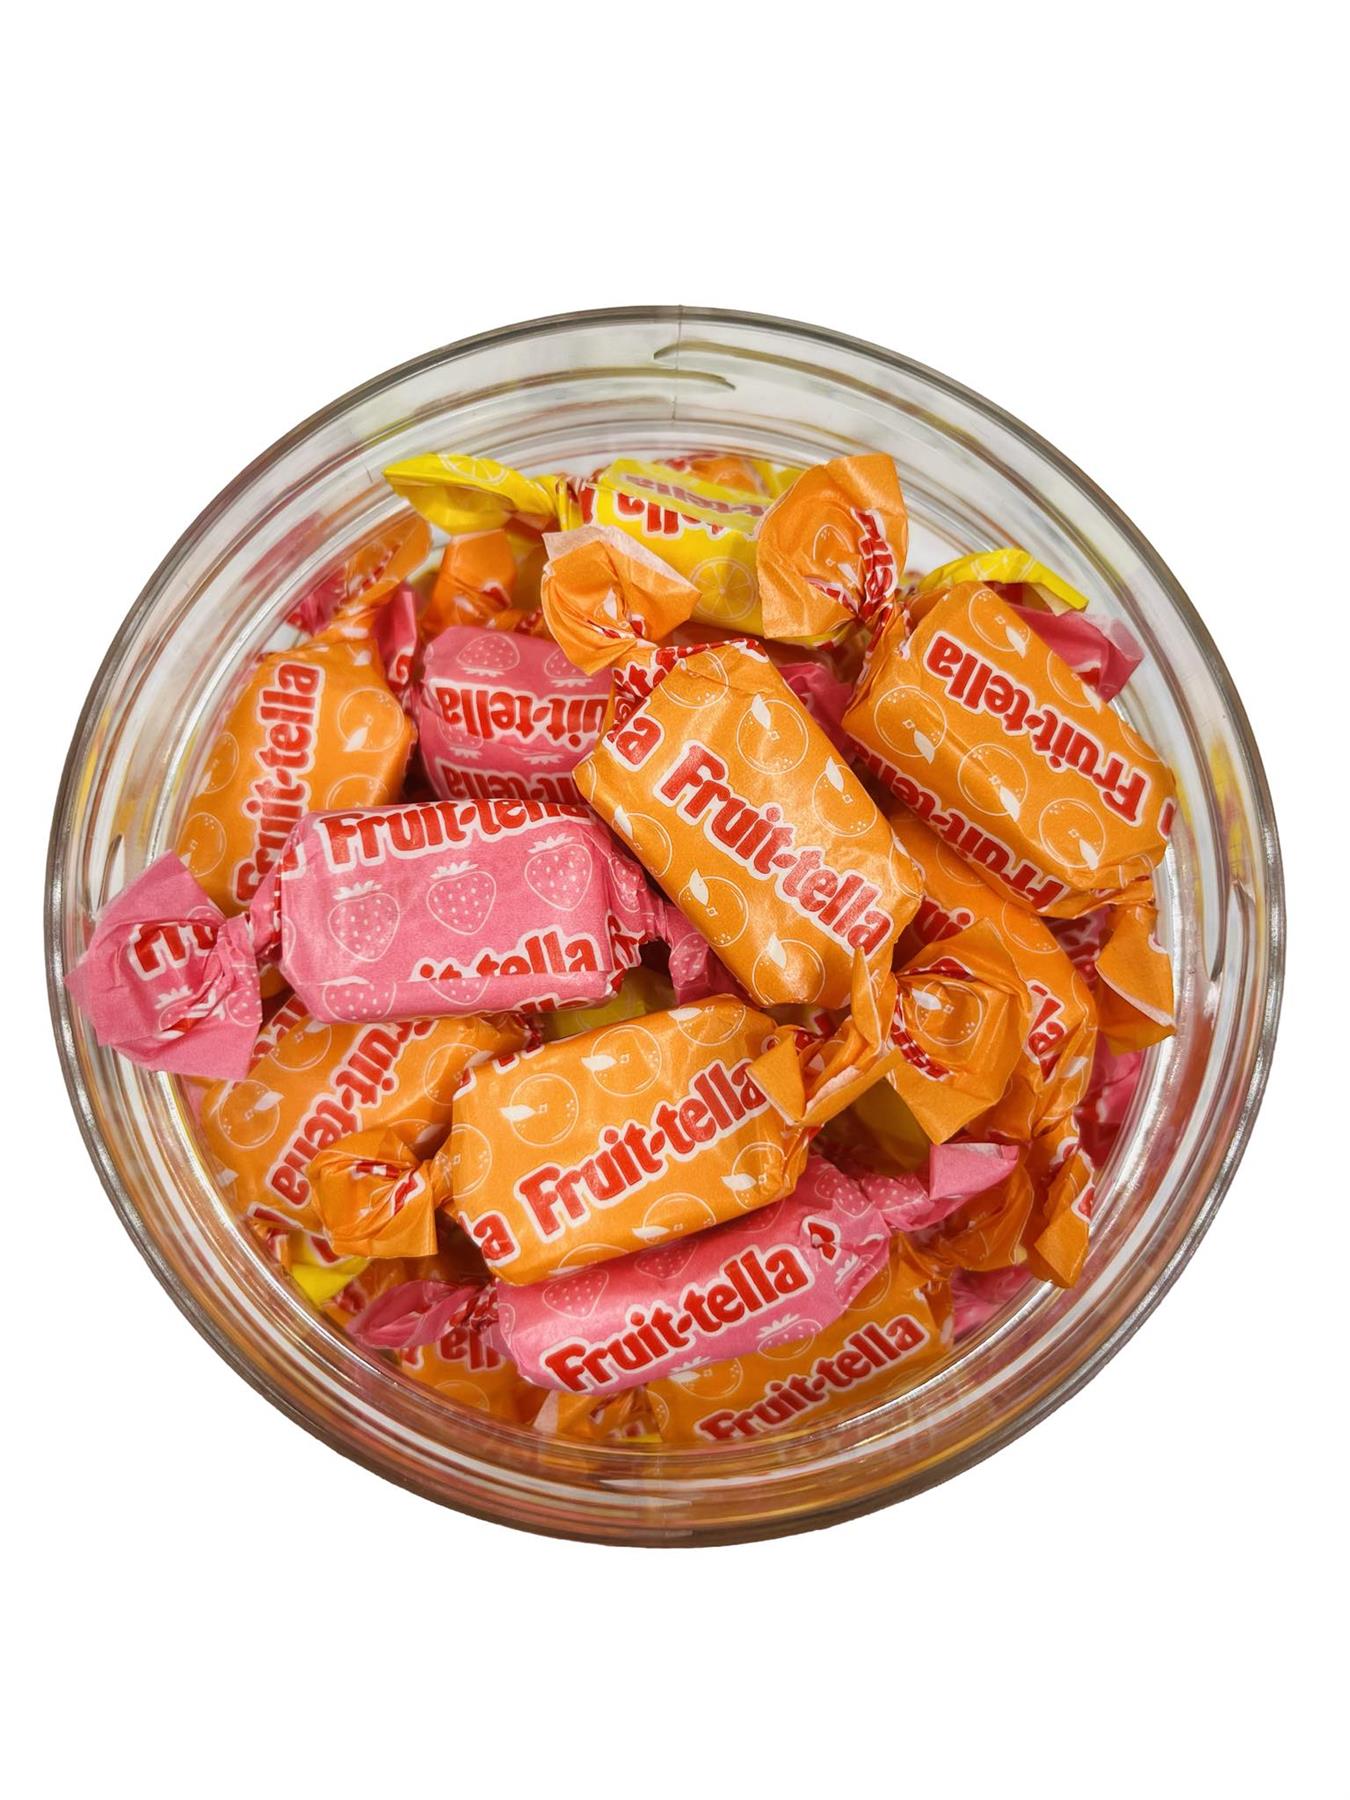 Simway Sweets Jar 625g - Fruitella Juicy Chews - Individually Wrapped Sweets - Approximately 85 Pieces